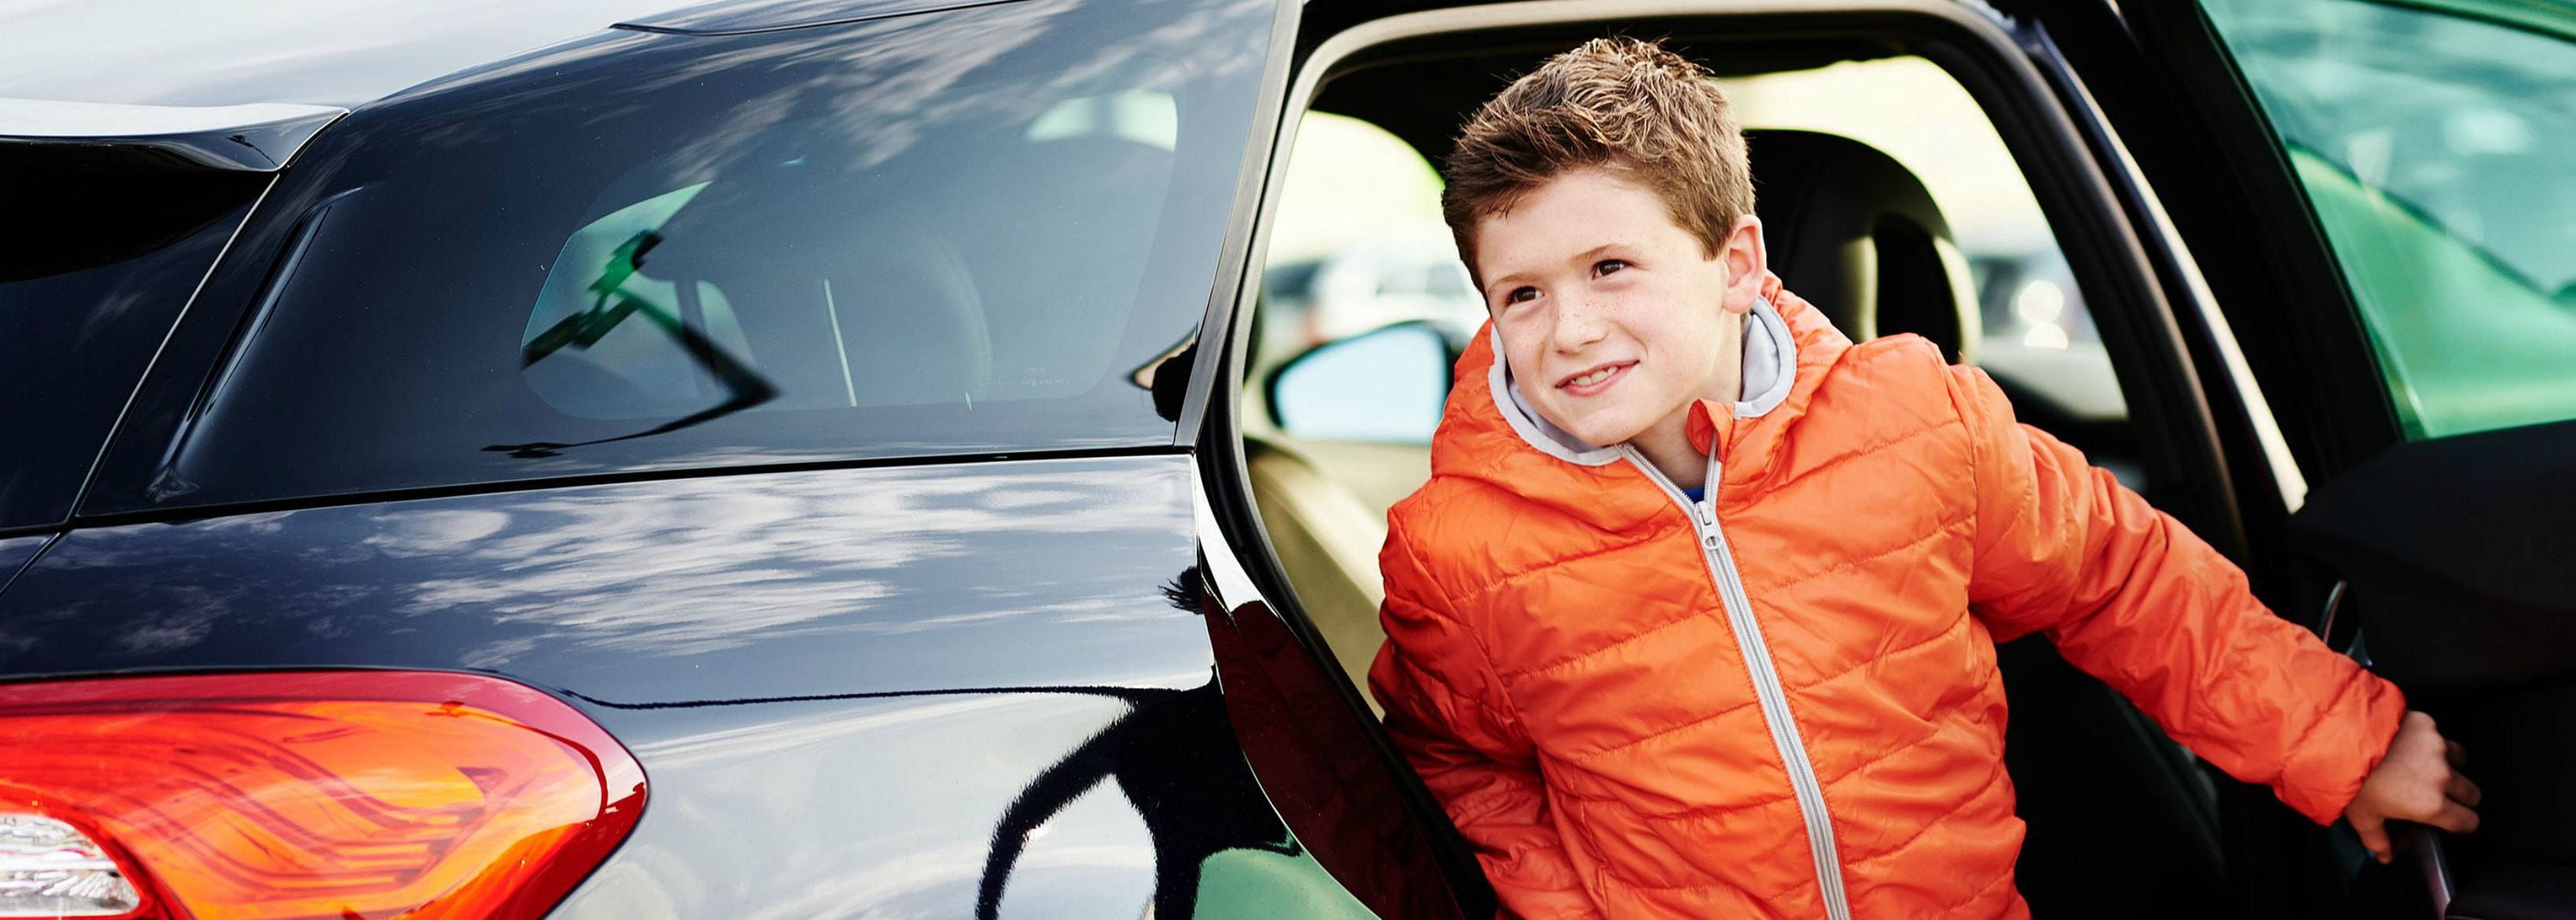 a child in an orange jacket gets out of the car